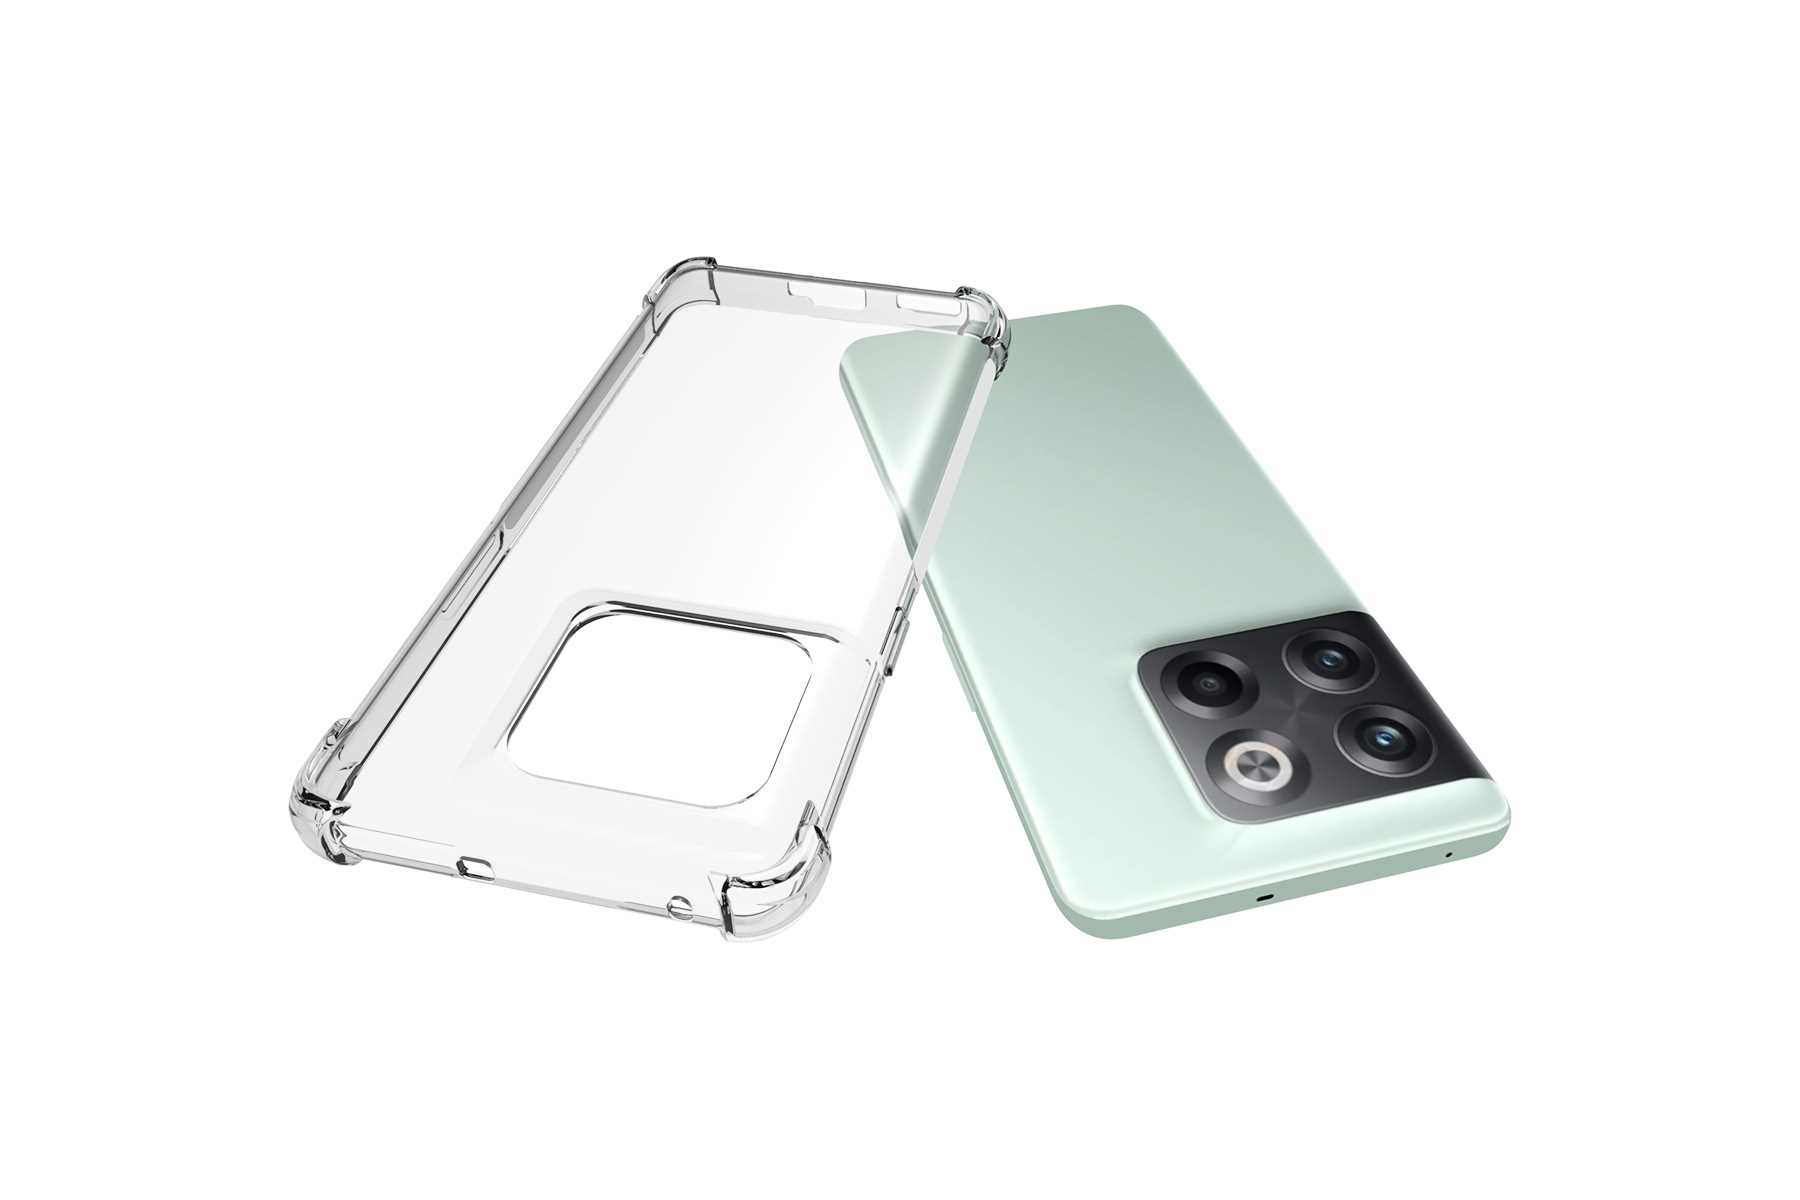 MTB MORE ENERGY Clear 5G, Backcover, Case, Transparent Armor OnePlus, 10T